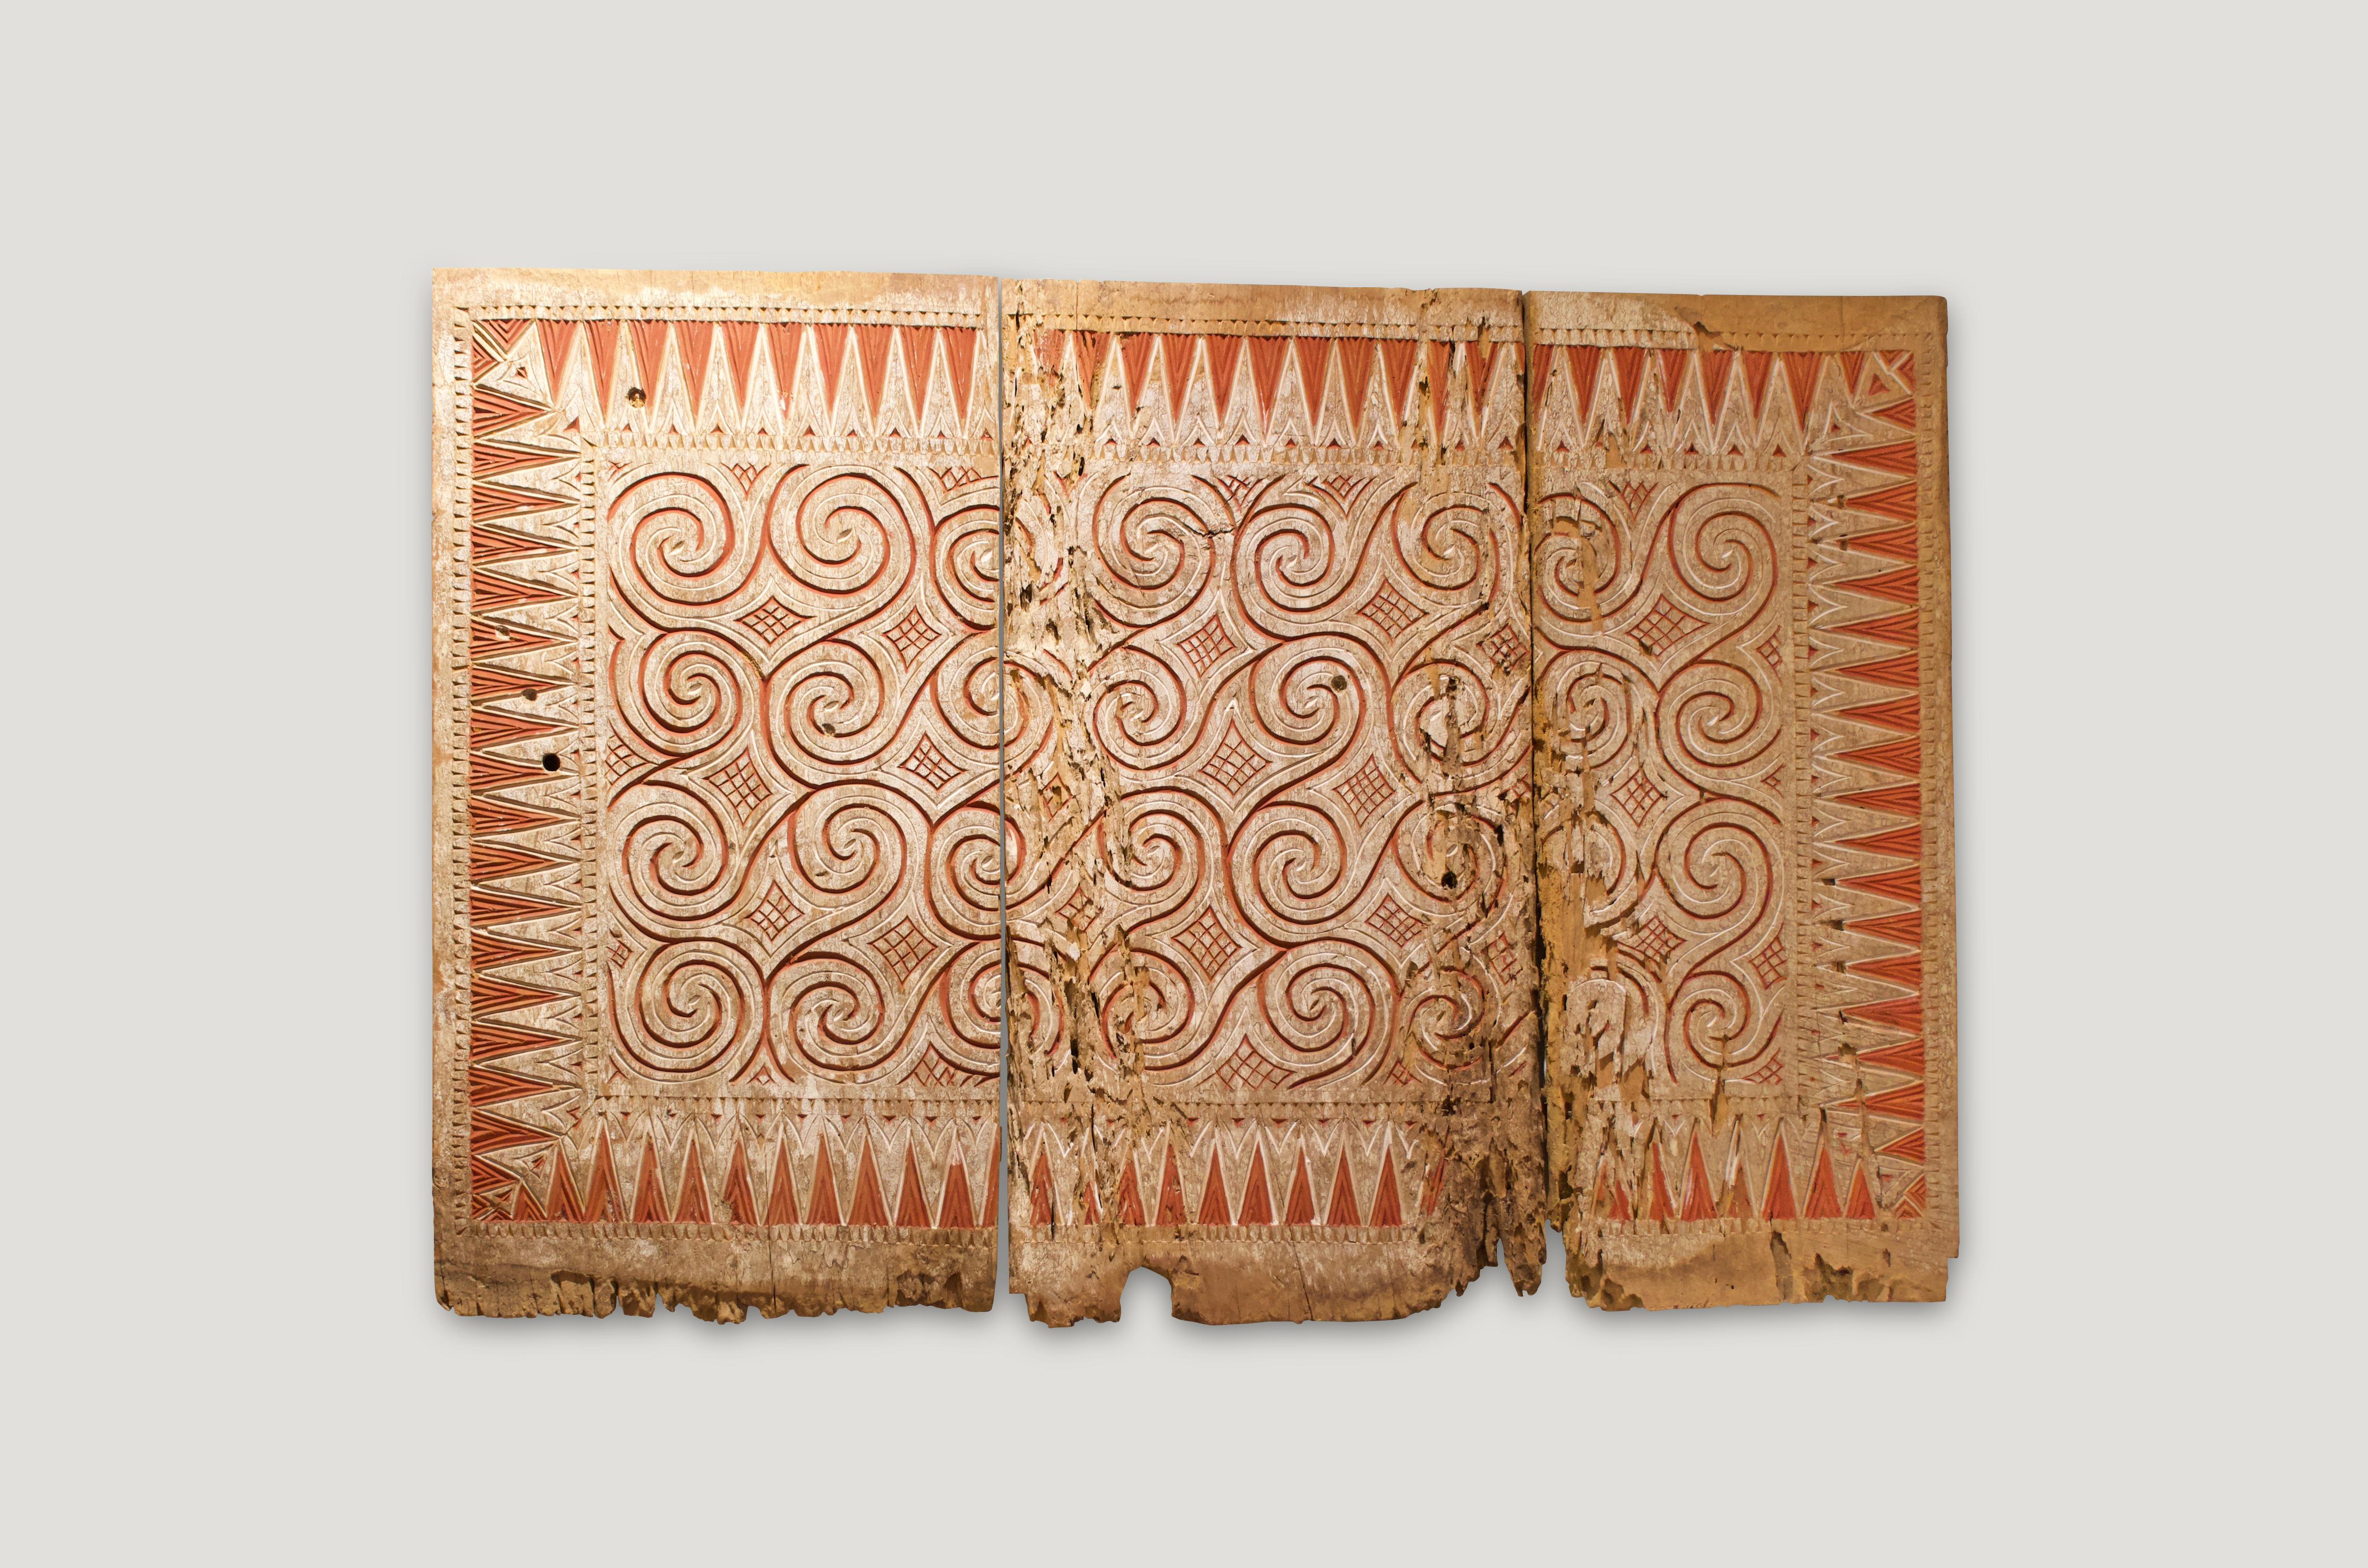 Primitive Andrianna Shamaris Ancient Hand Carved Panel Symbolizing Peace and Happiness